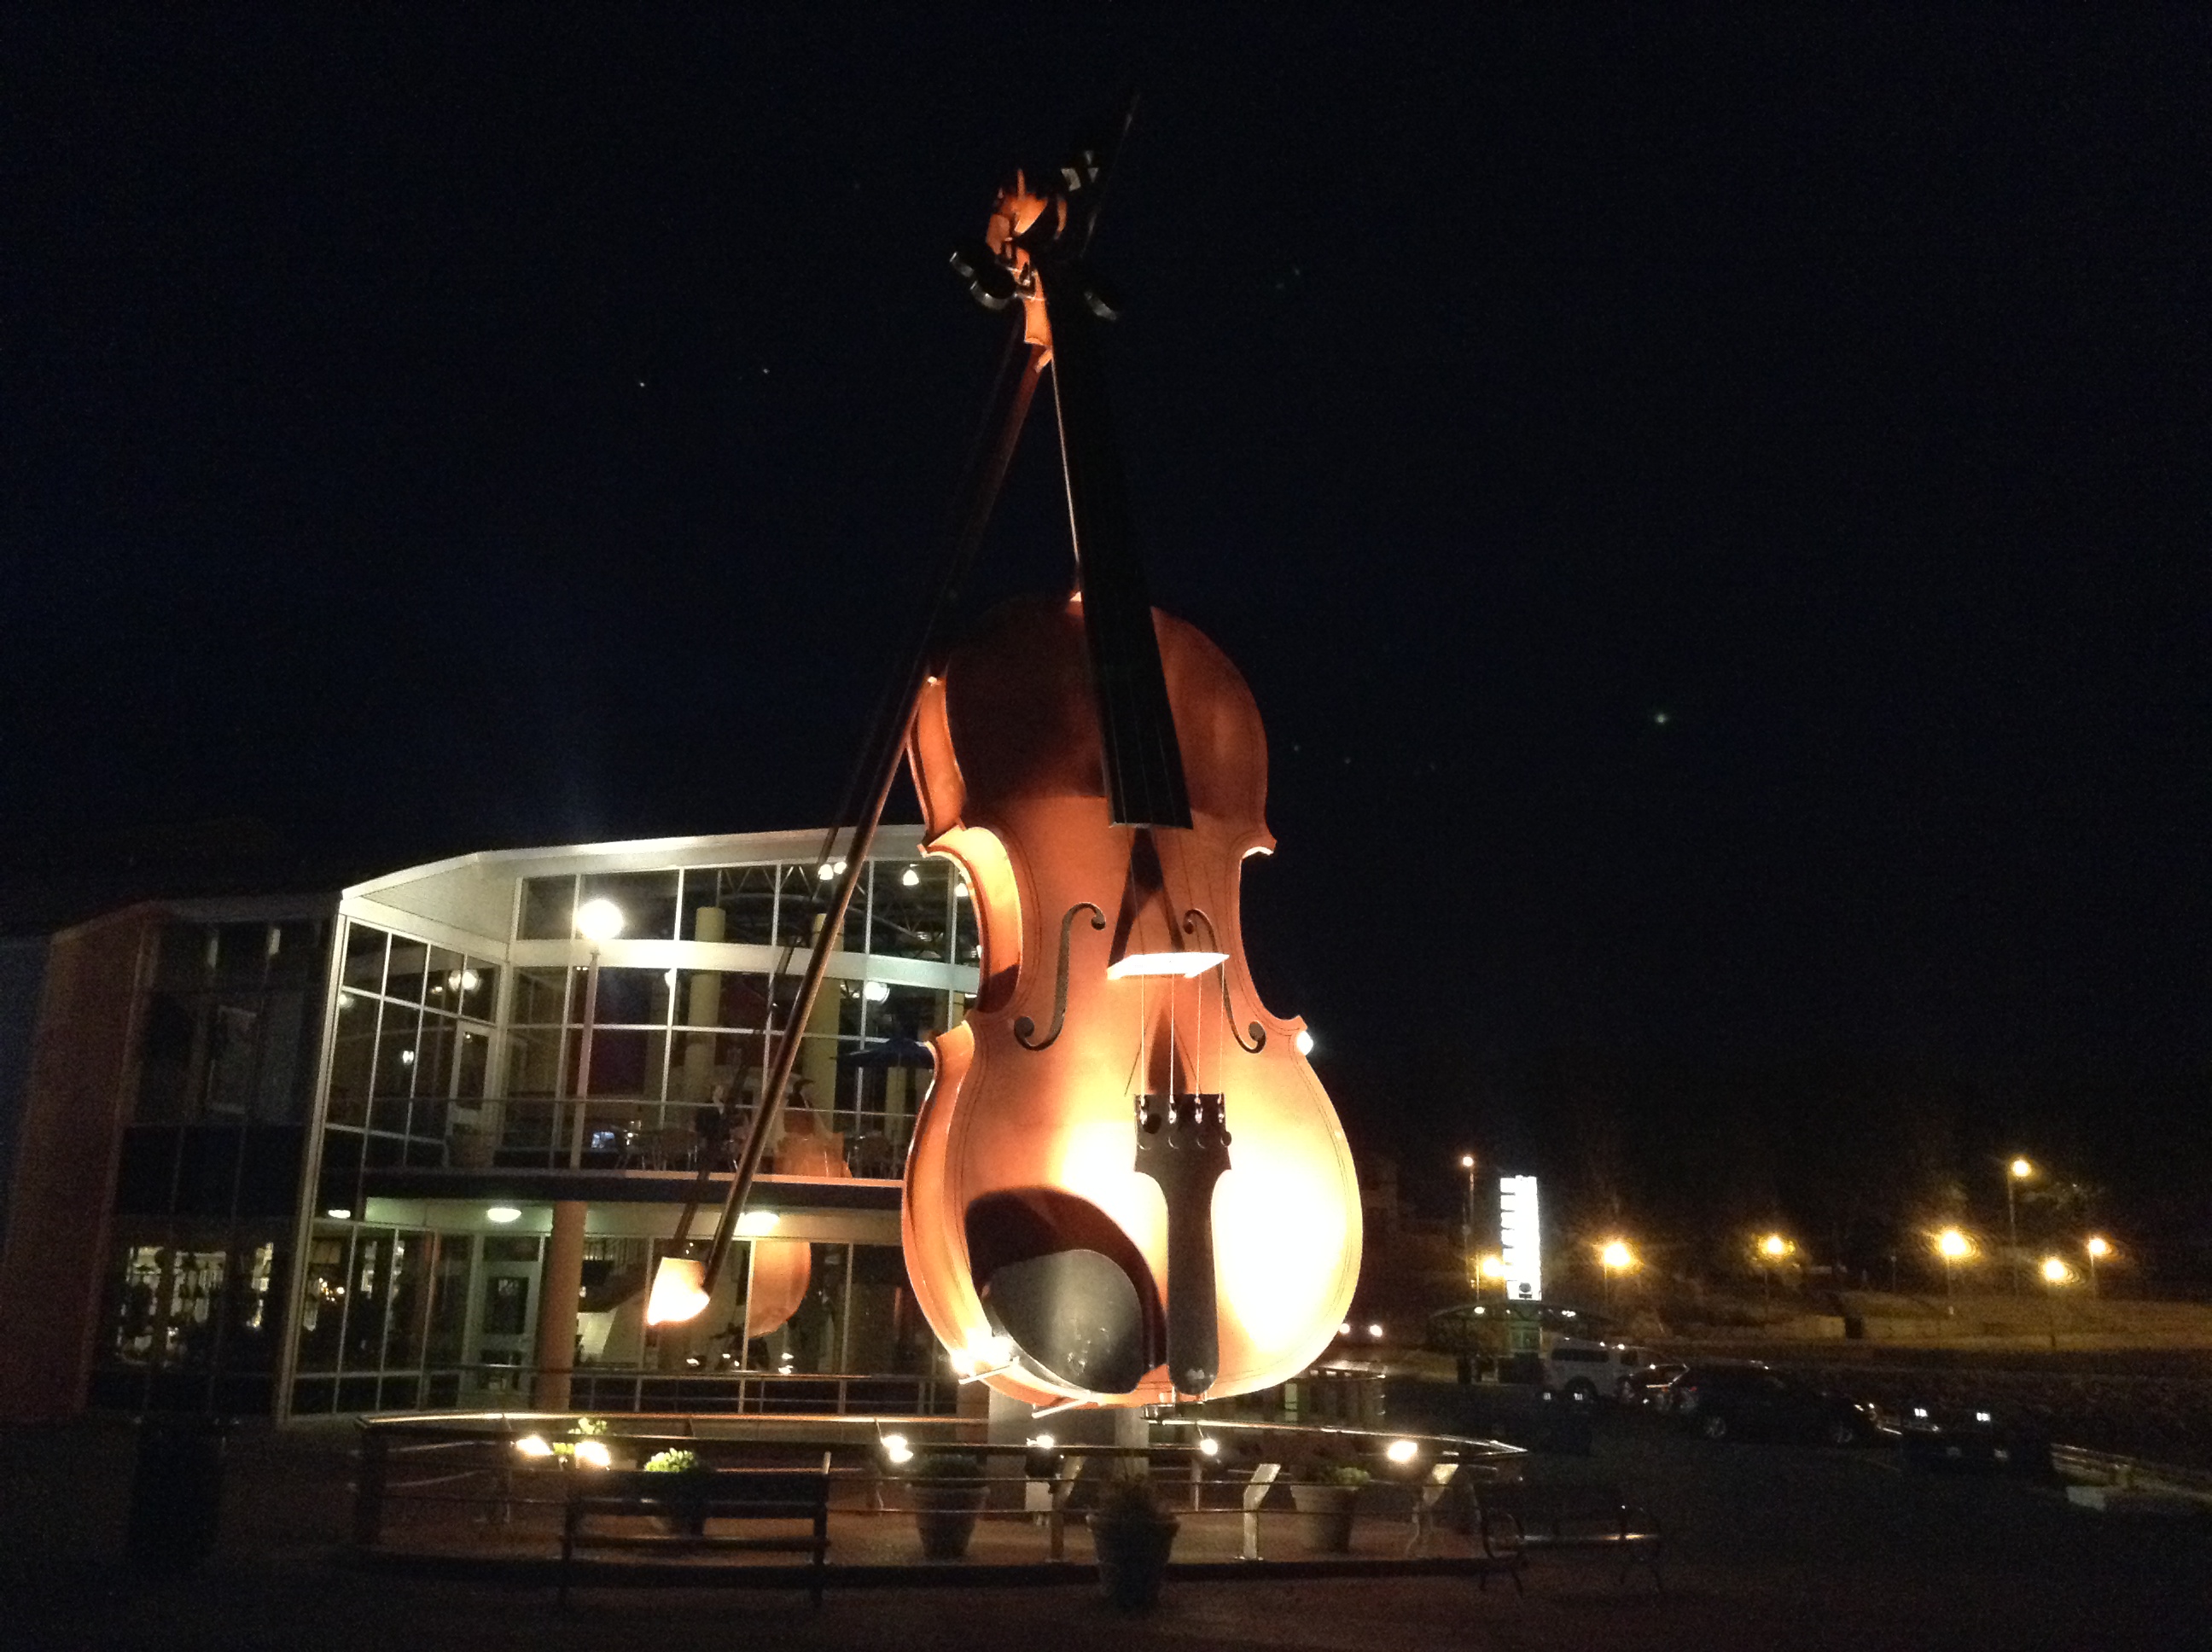 Here is The Big Fiddle in Sydney Nova Scotia at the Marine Terminal during on Monday Evening and it looks very beautiful.